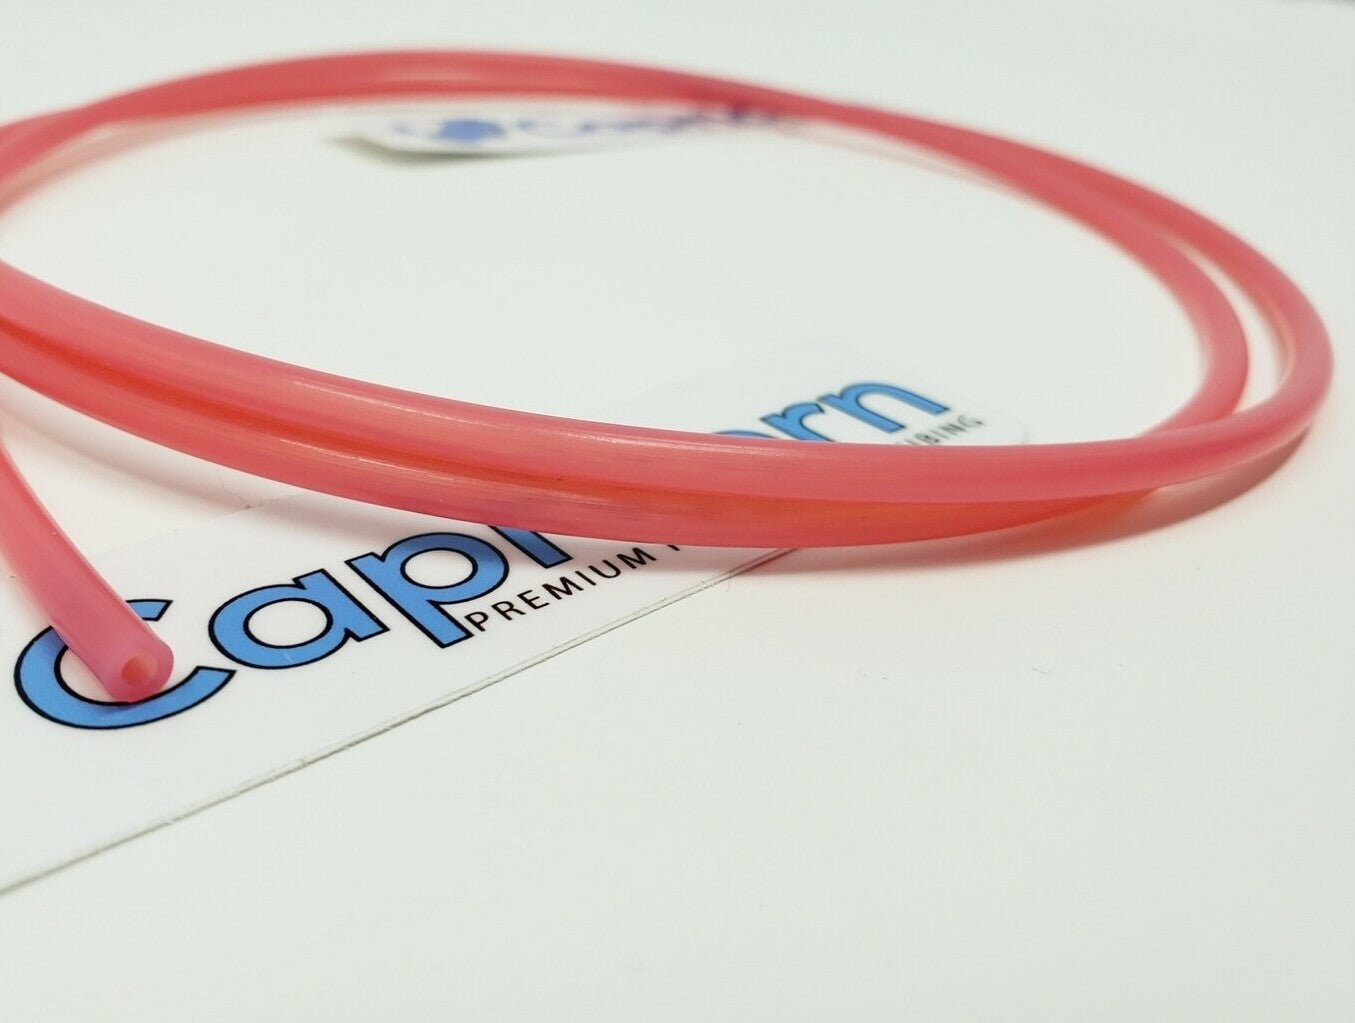 Capricorn TL Bowden Tubing 1.75mm – Printed Solid